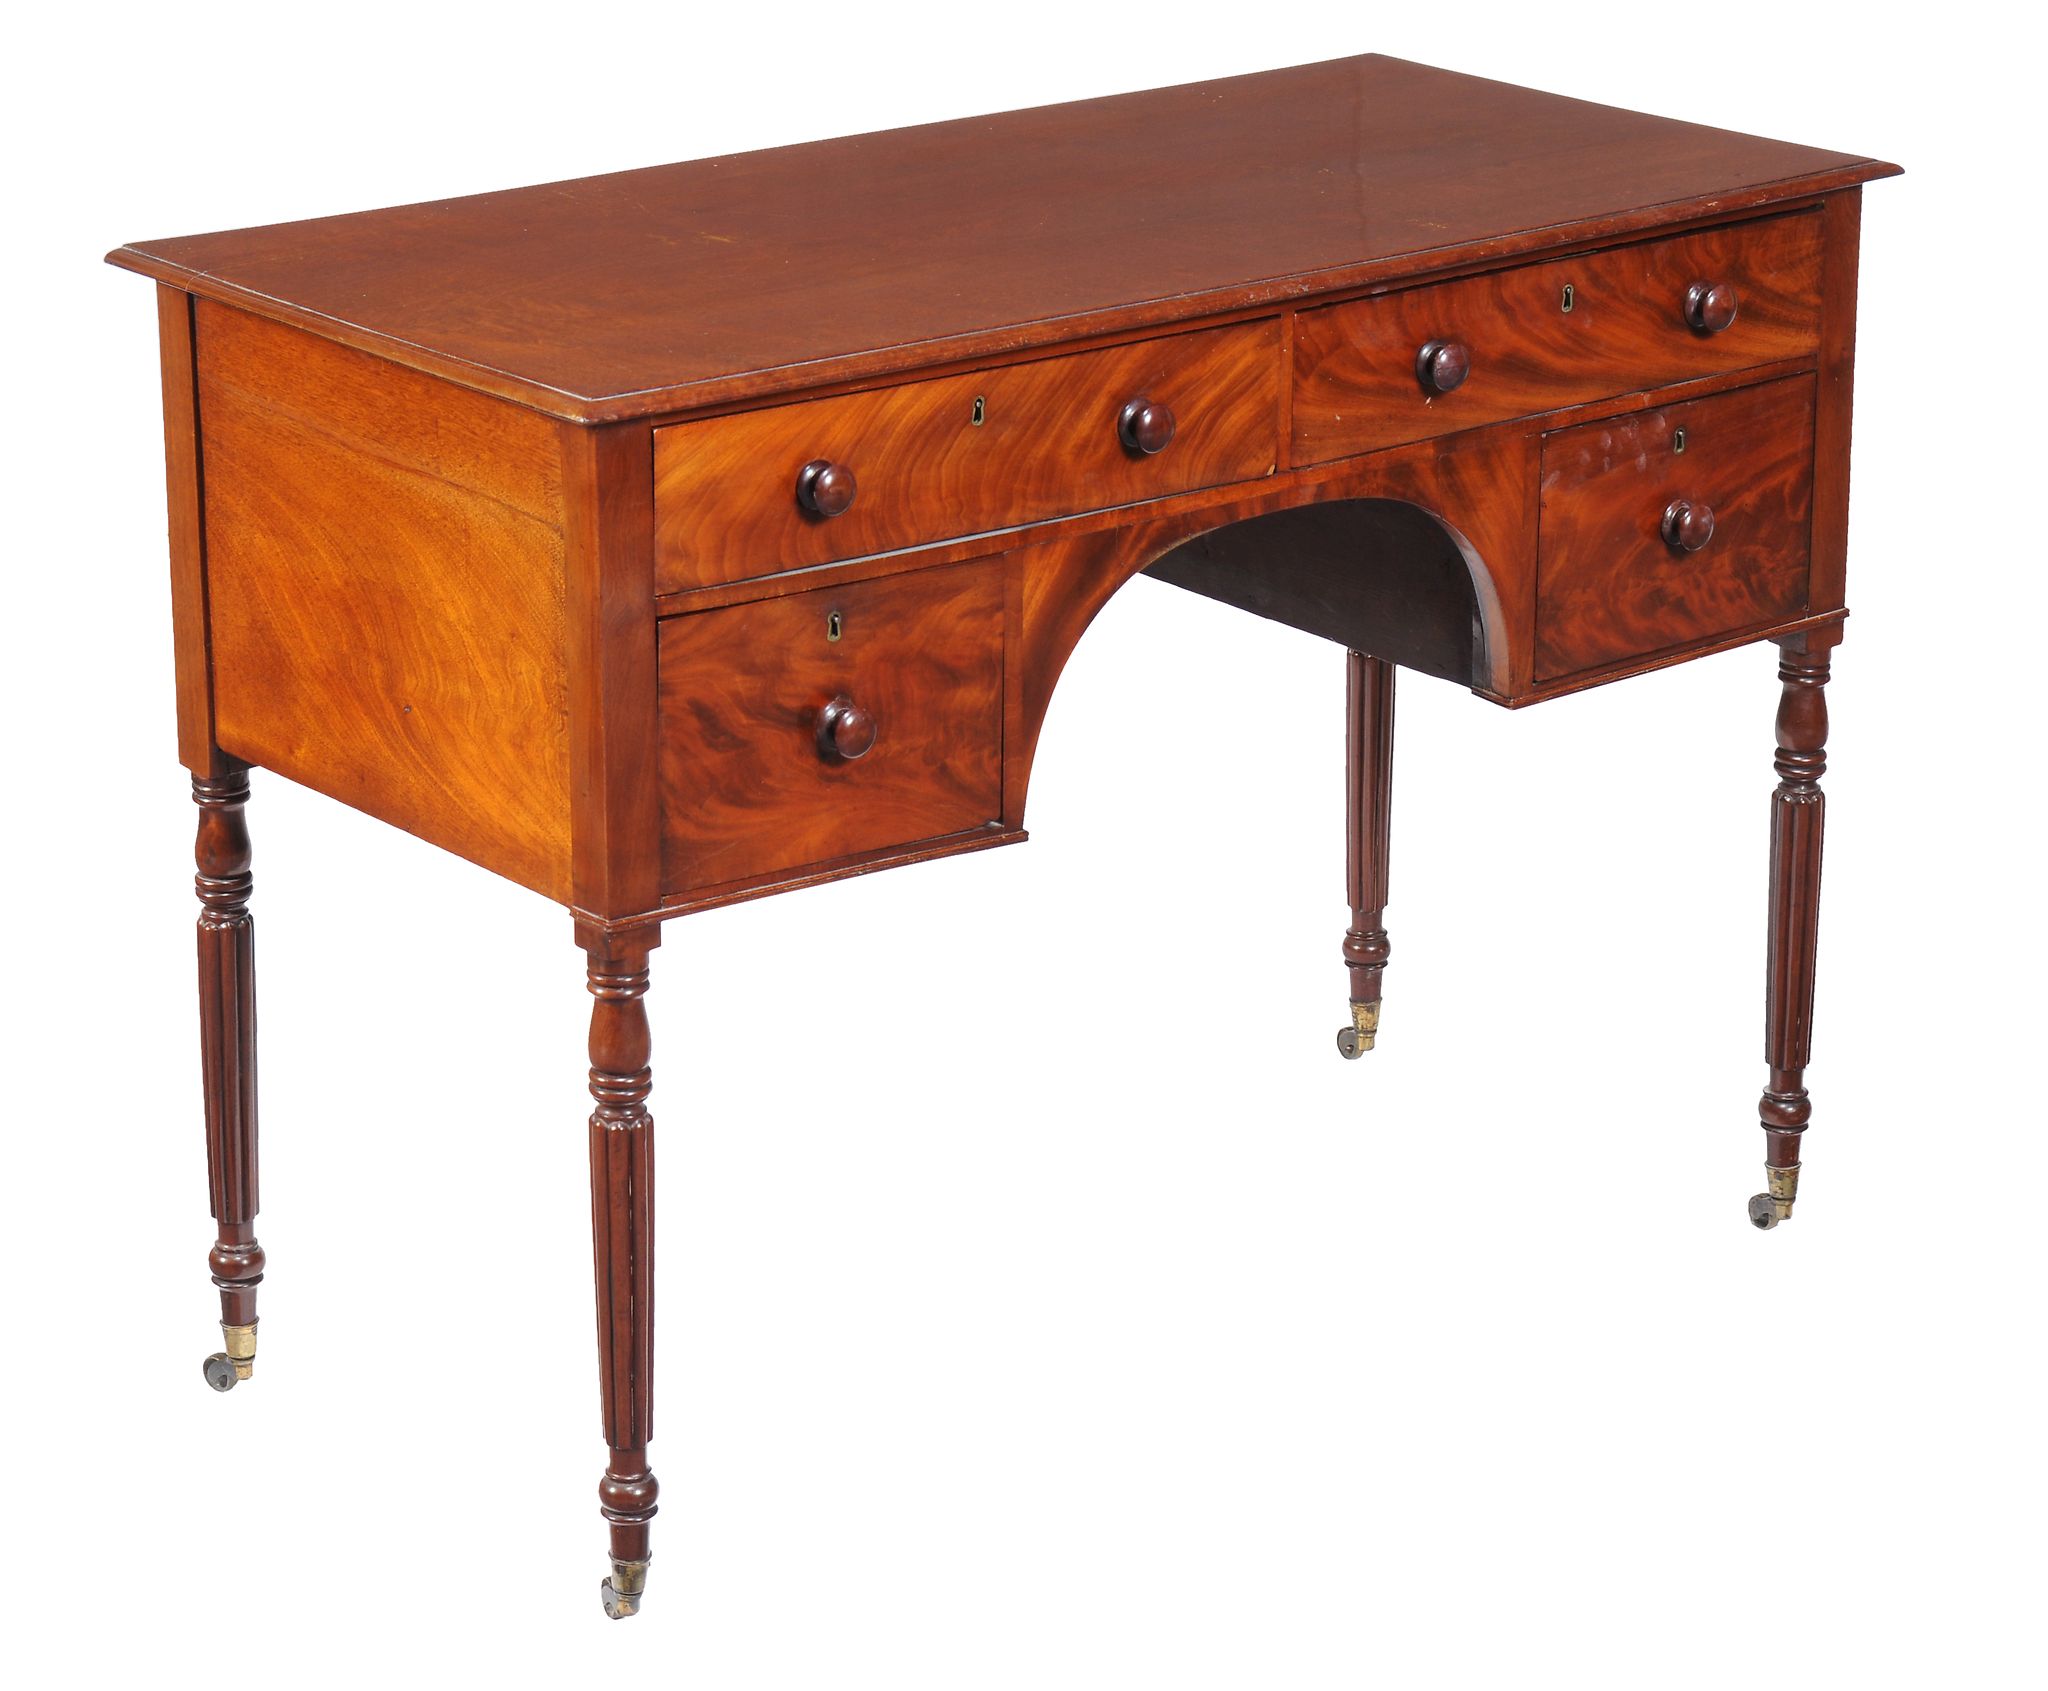 A Regency mahogany writing or dressing table , circa 1820, in the manner of Gillows, with